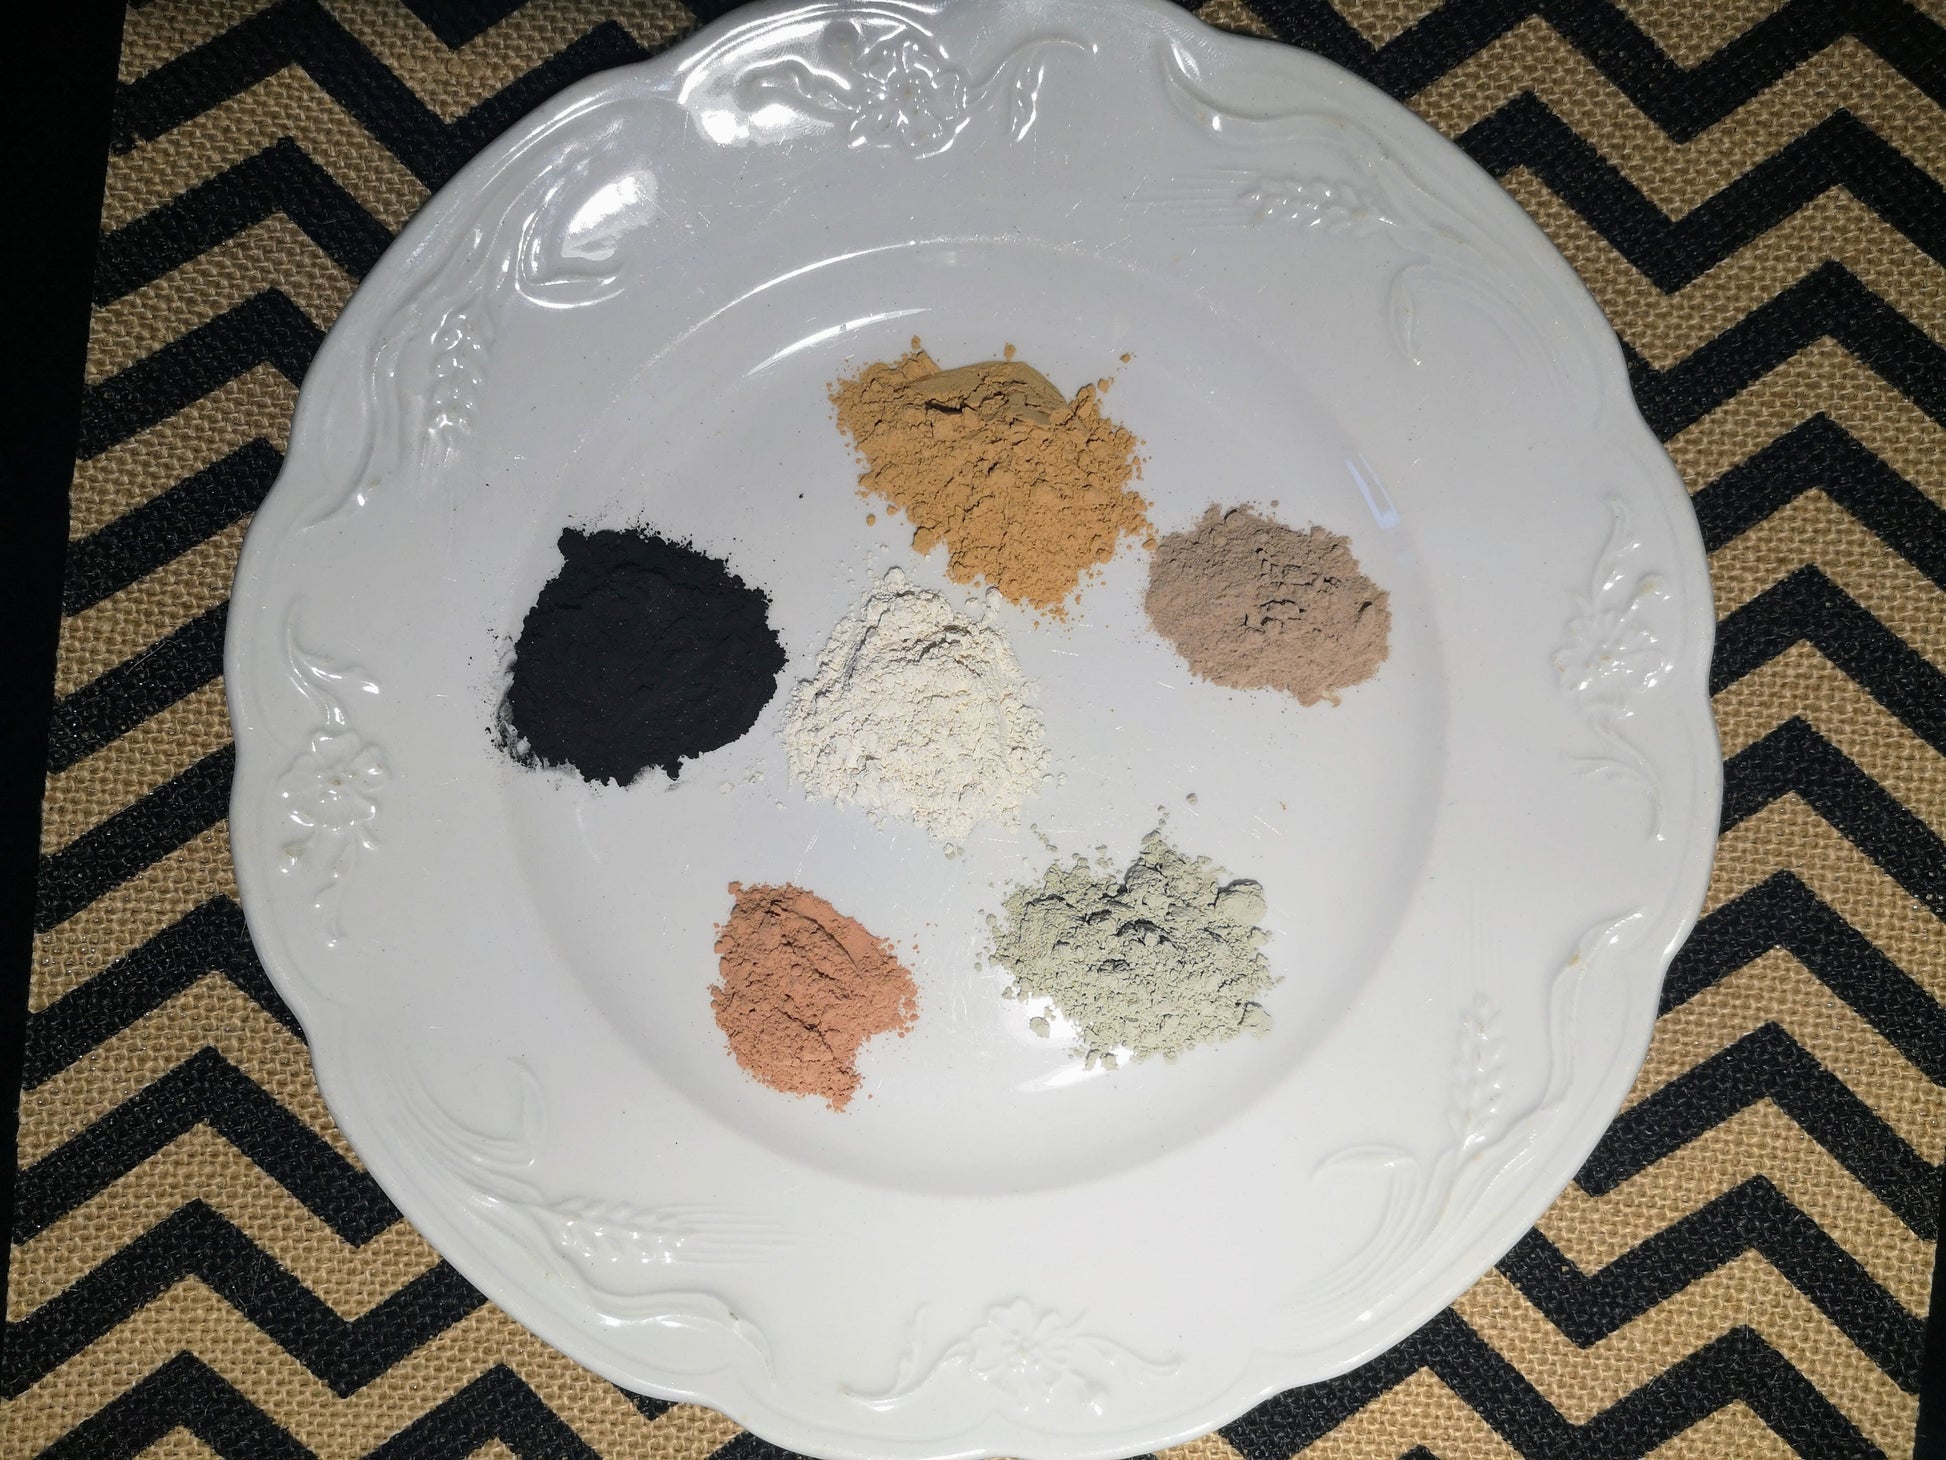 White porcelain plate on a chevron background. There are 6 small piles of clay on the plate: charcoal, caramel, rhassoul, kaolin, peach and green.